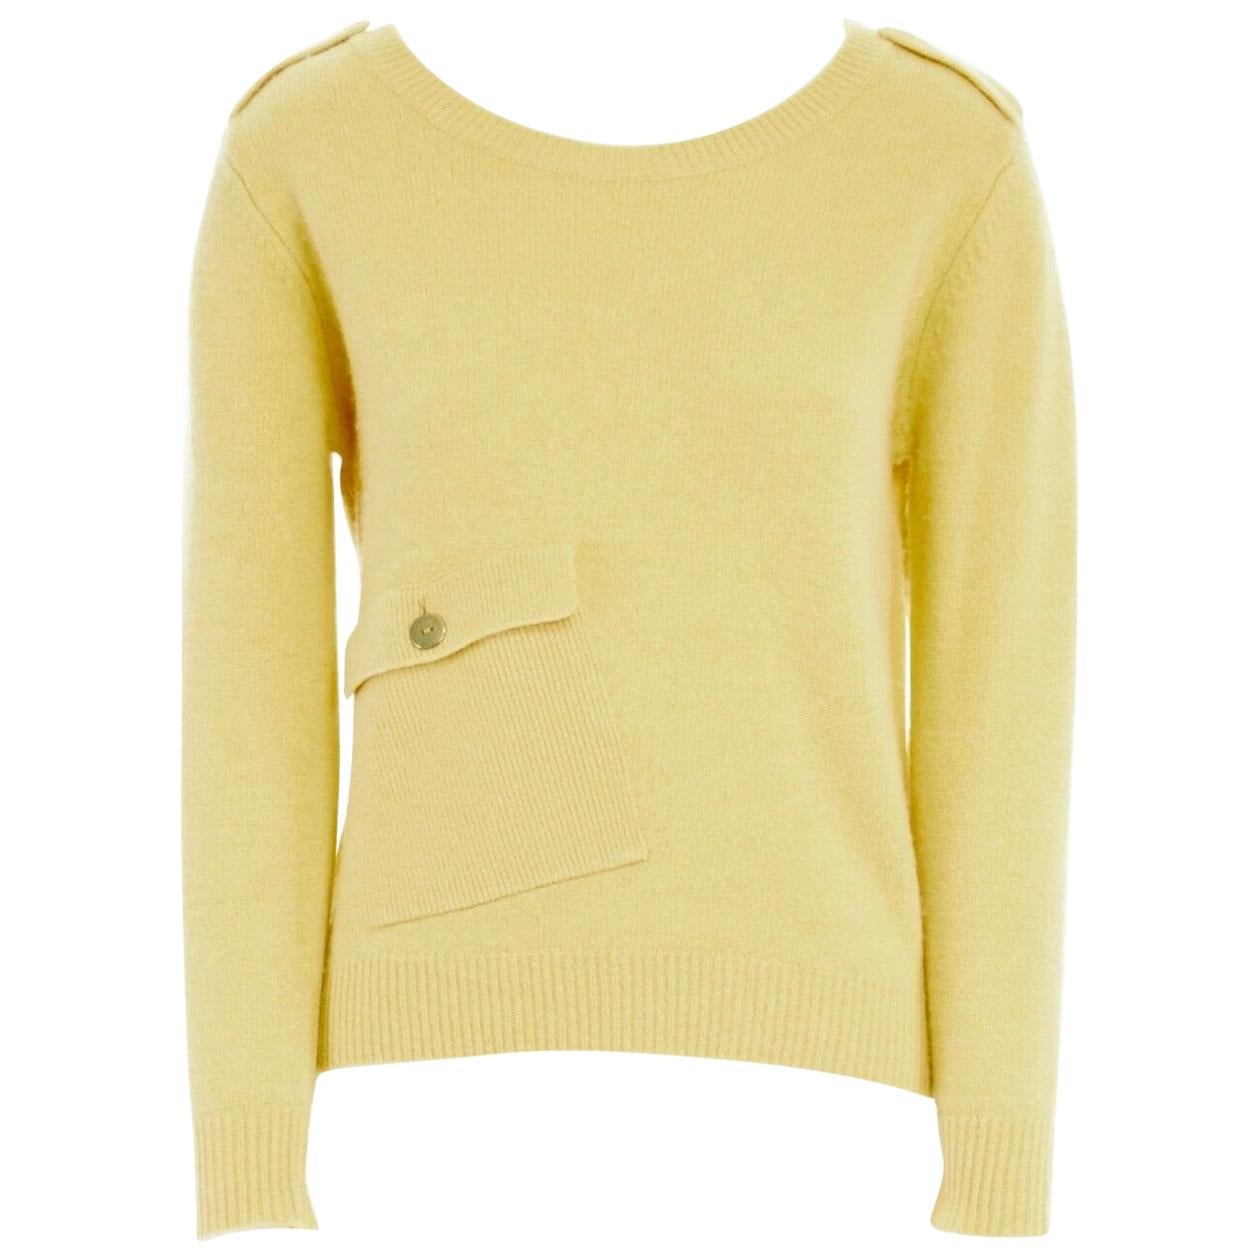 MAX & CO. MAX MARA 100% wool canary yellow patch pocket sweater top S